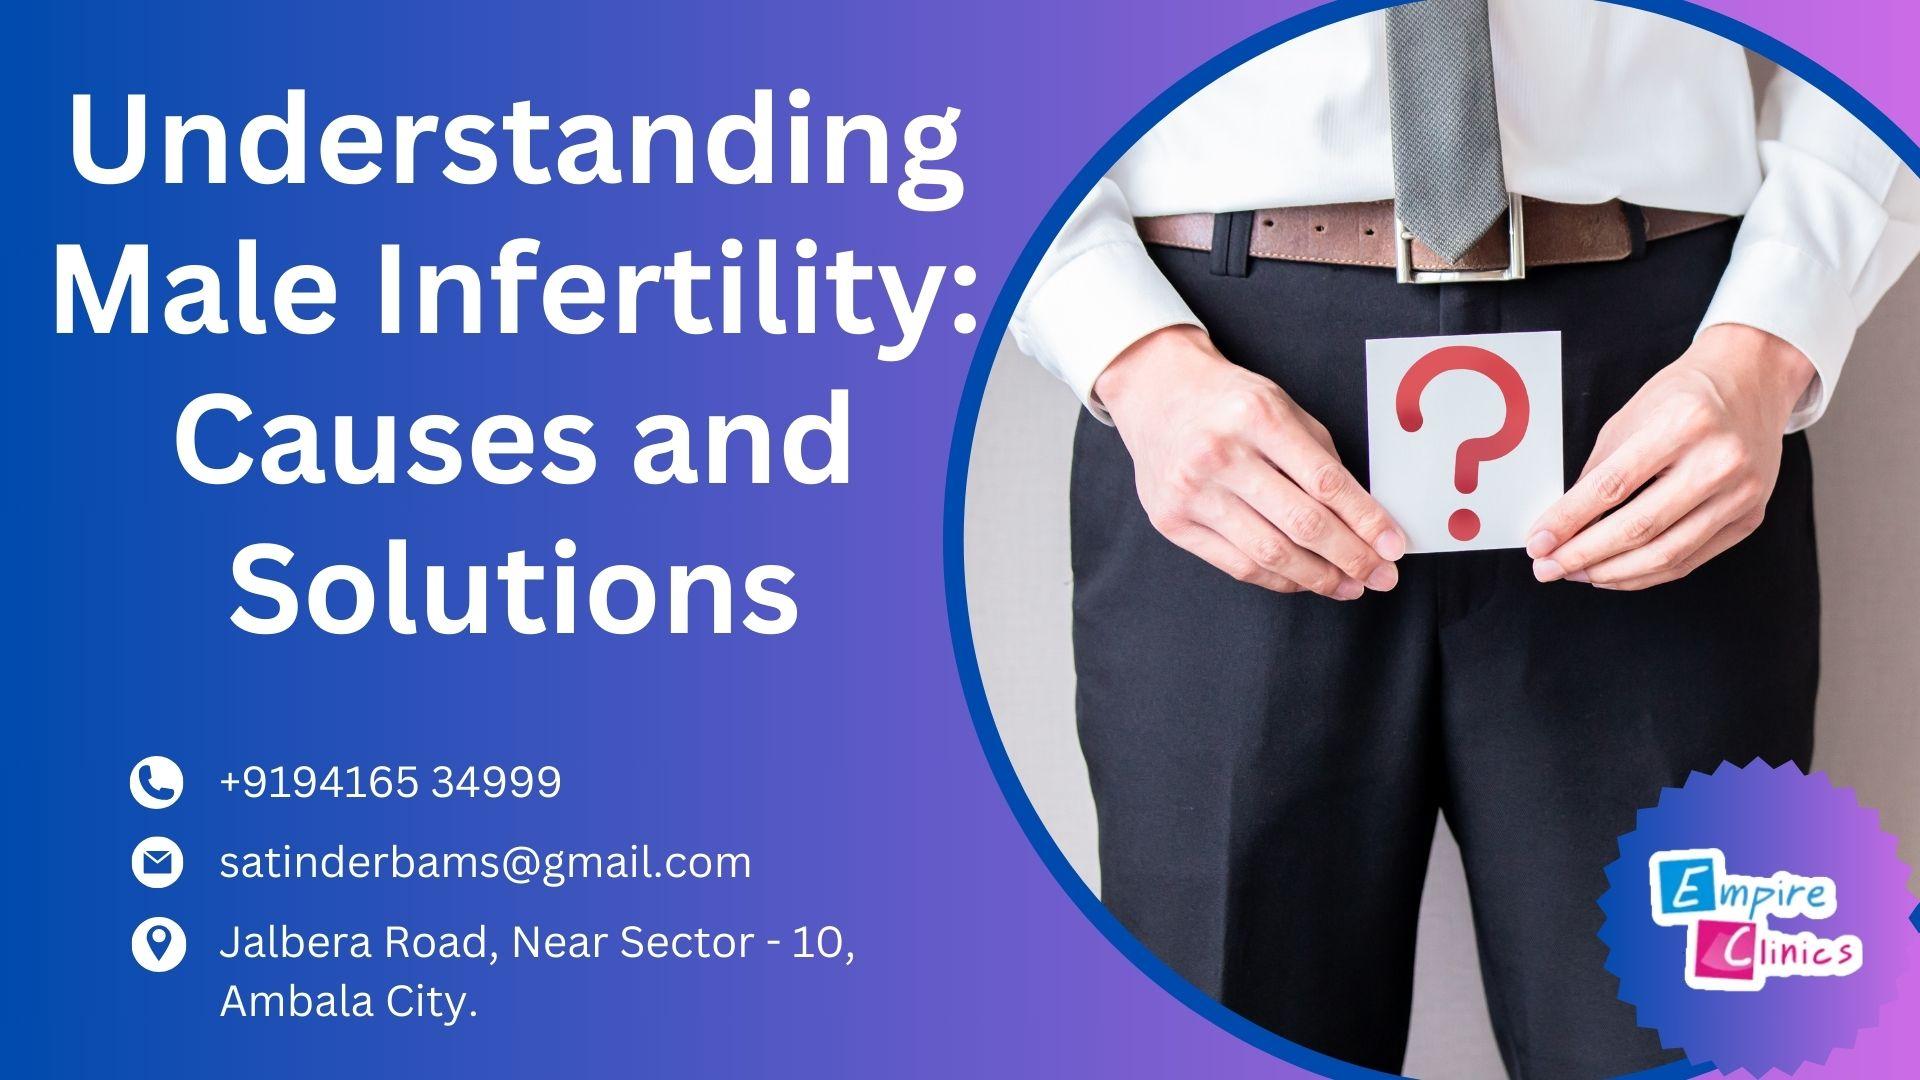 Understanding Male Infertility: Causes and Solutions